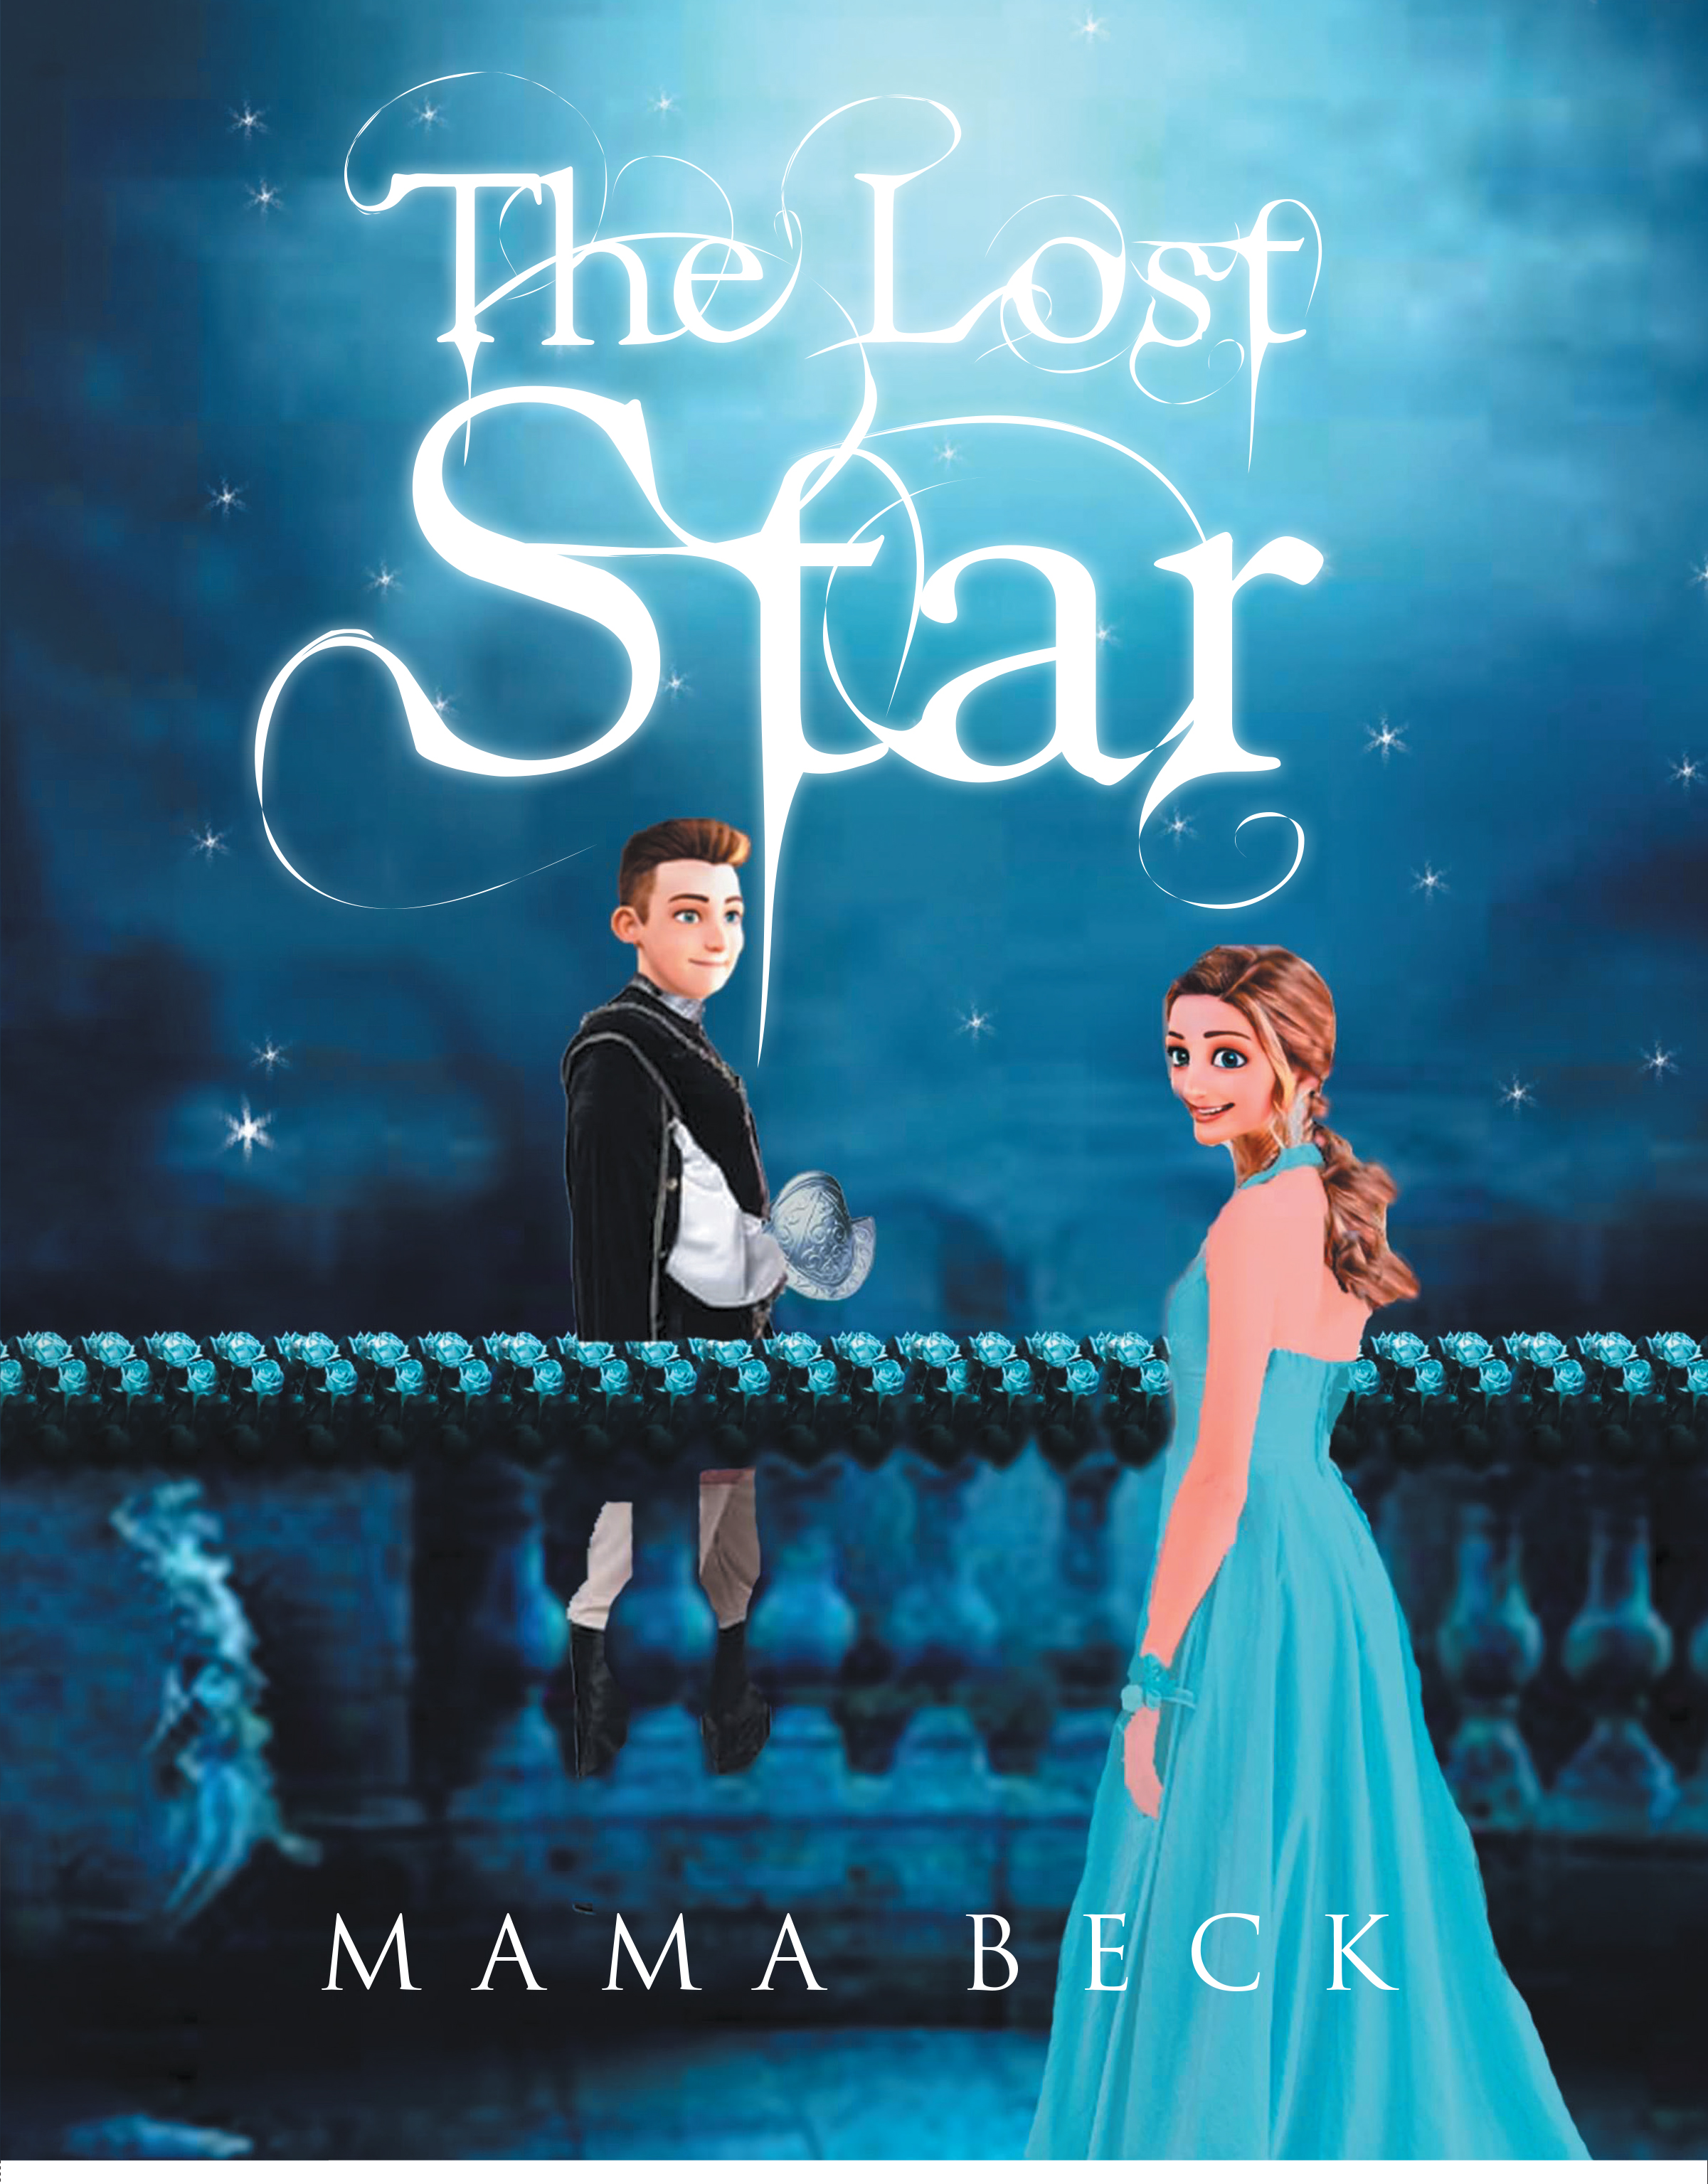 Author Mama Beck’s New Book, "The Lost Star," is an Enchanting and Compelling Story That Dares to Ask Readers How Far They Would Go to Save the One They Love